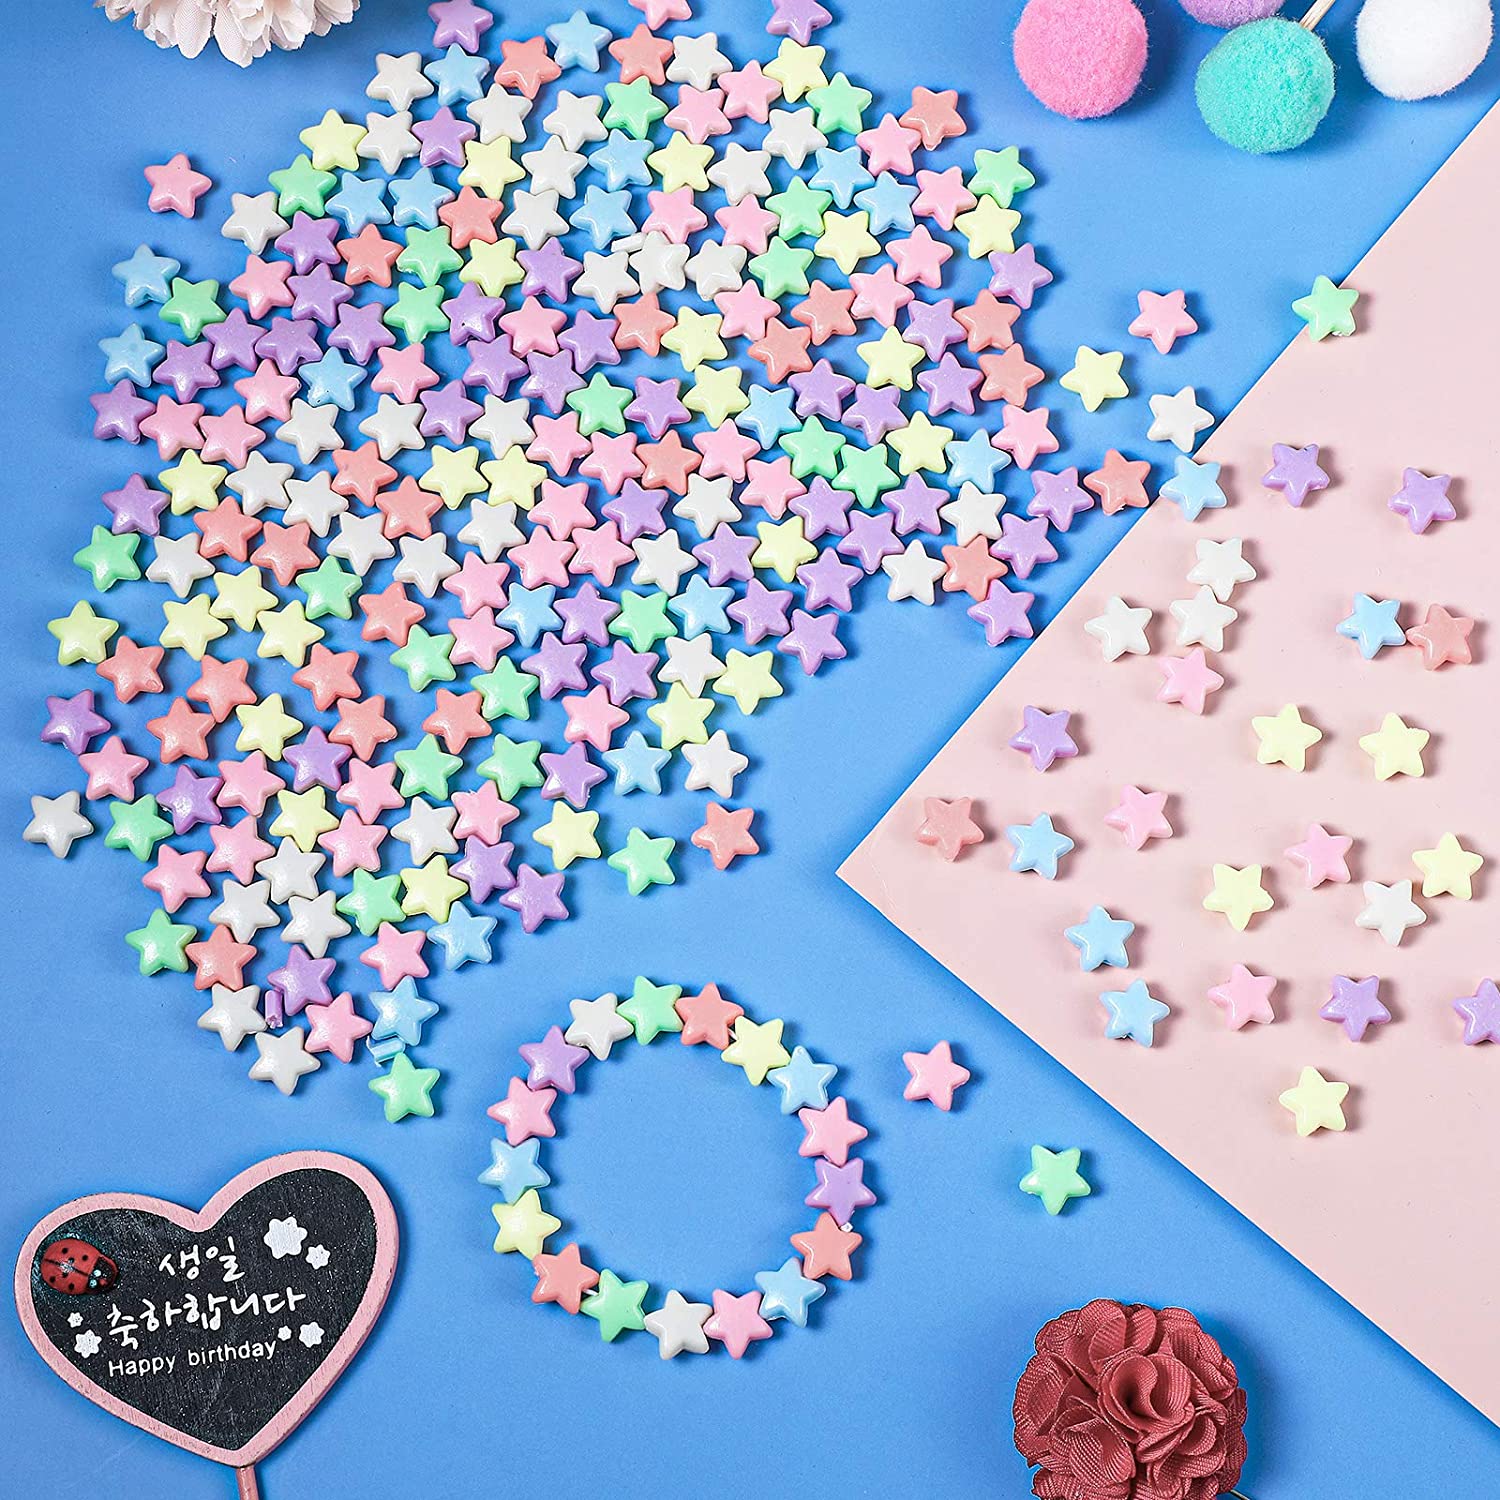 500 Pieces Acrylic Star Beads Assorted Colorful Pastel Star Shape Charming  Beads Spacer for DIY Jewelry Craft Making Necklace Bracelet Supplies